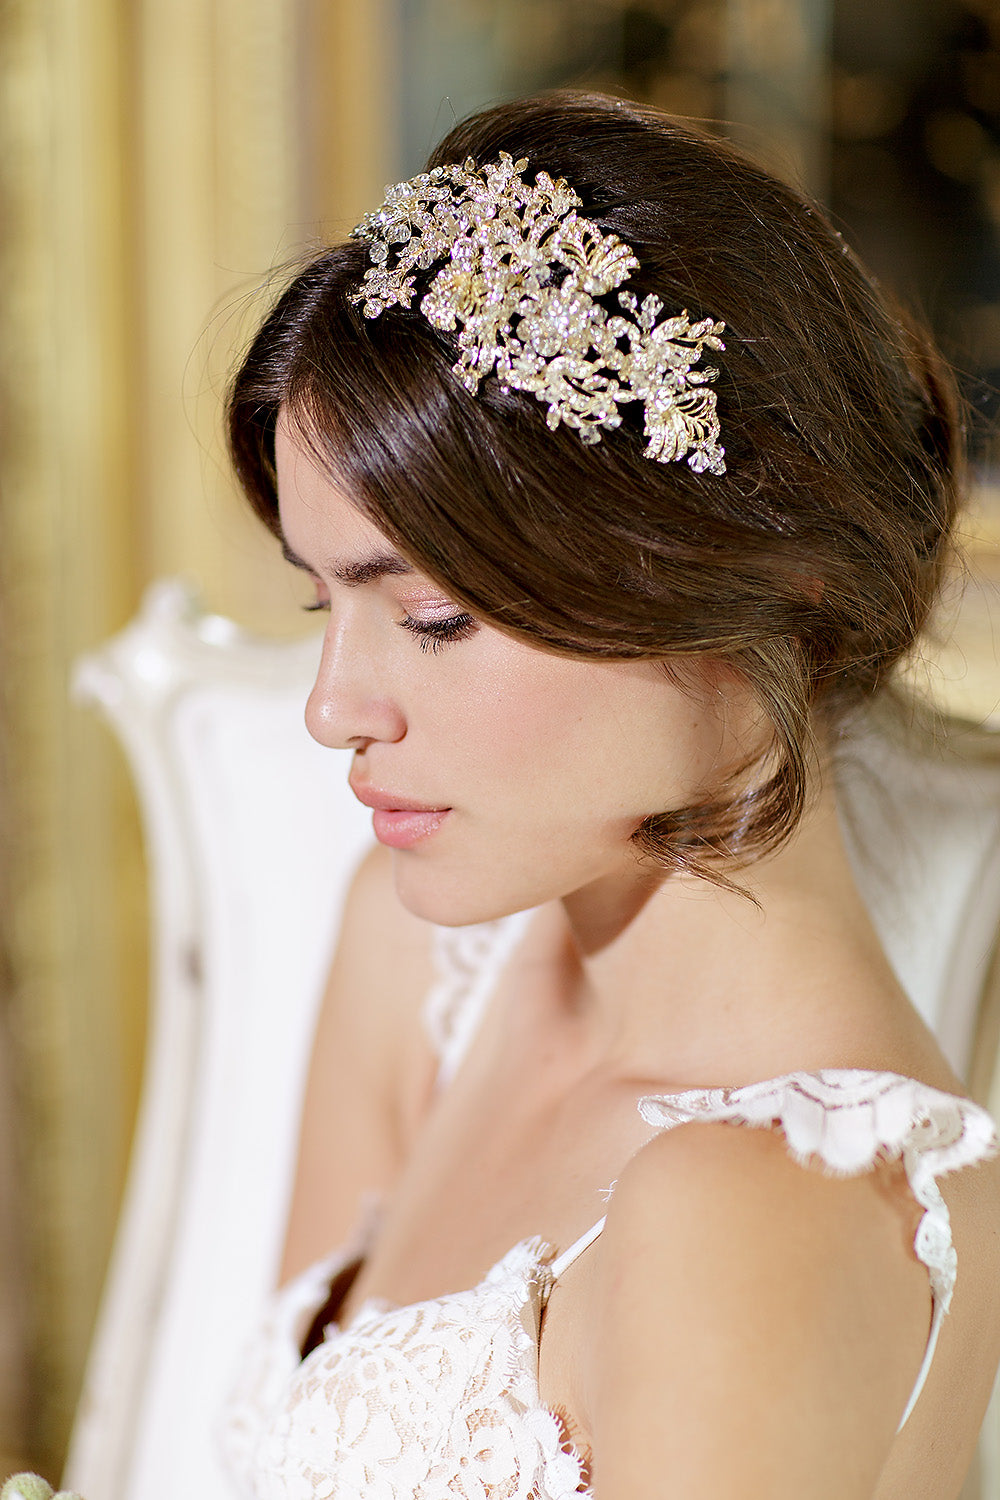 How to choose the right bridal hair accessory